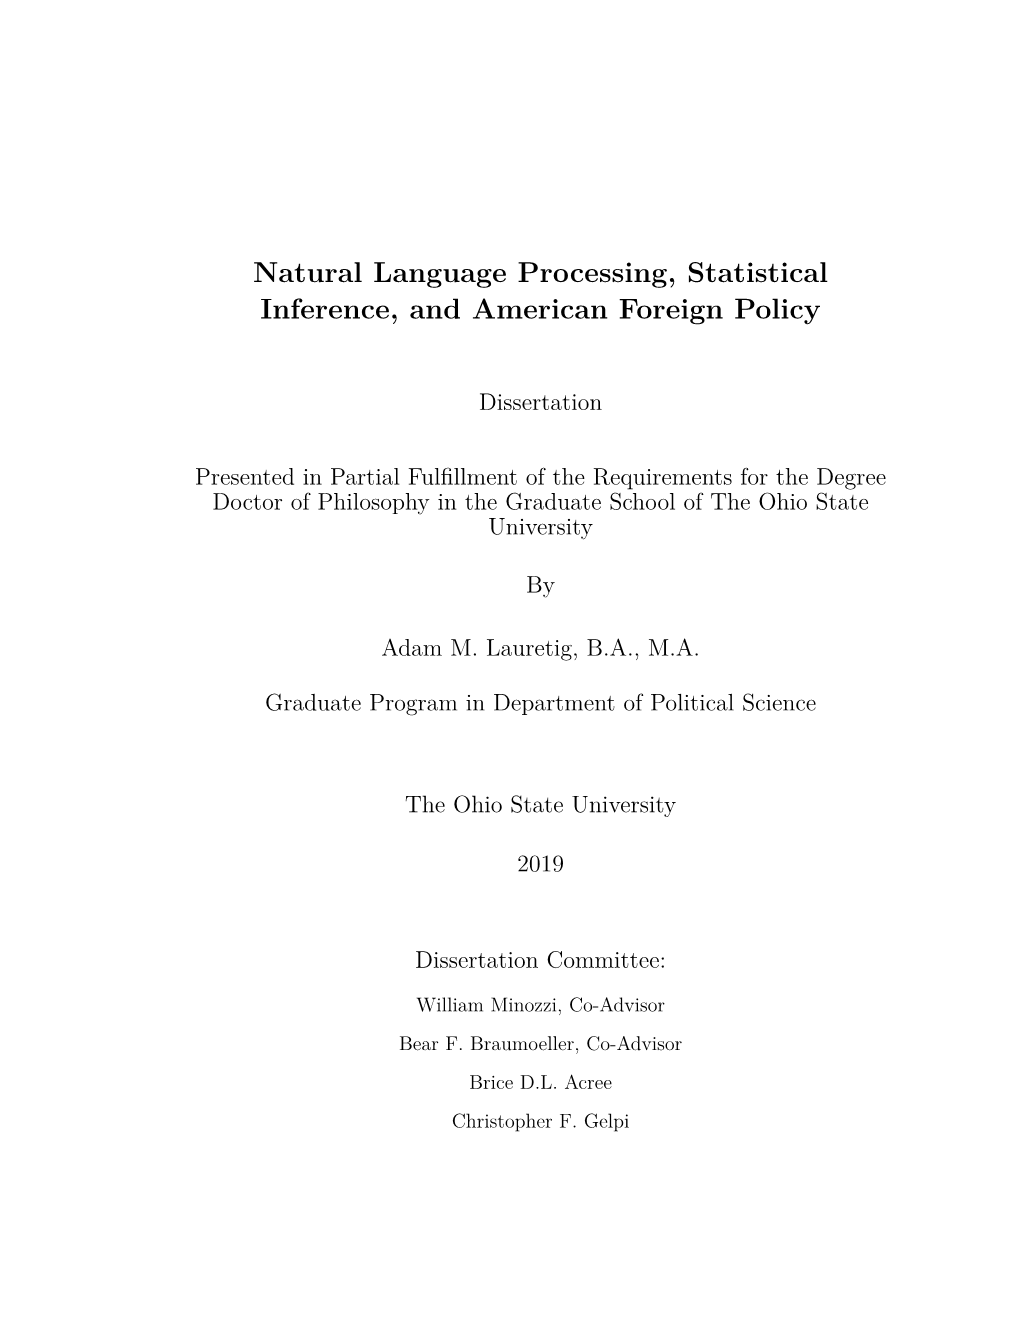 Natural Language Processing, Statistical Inference, and American Foreign Policy